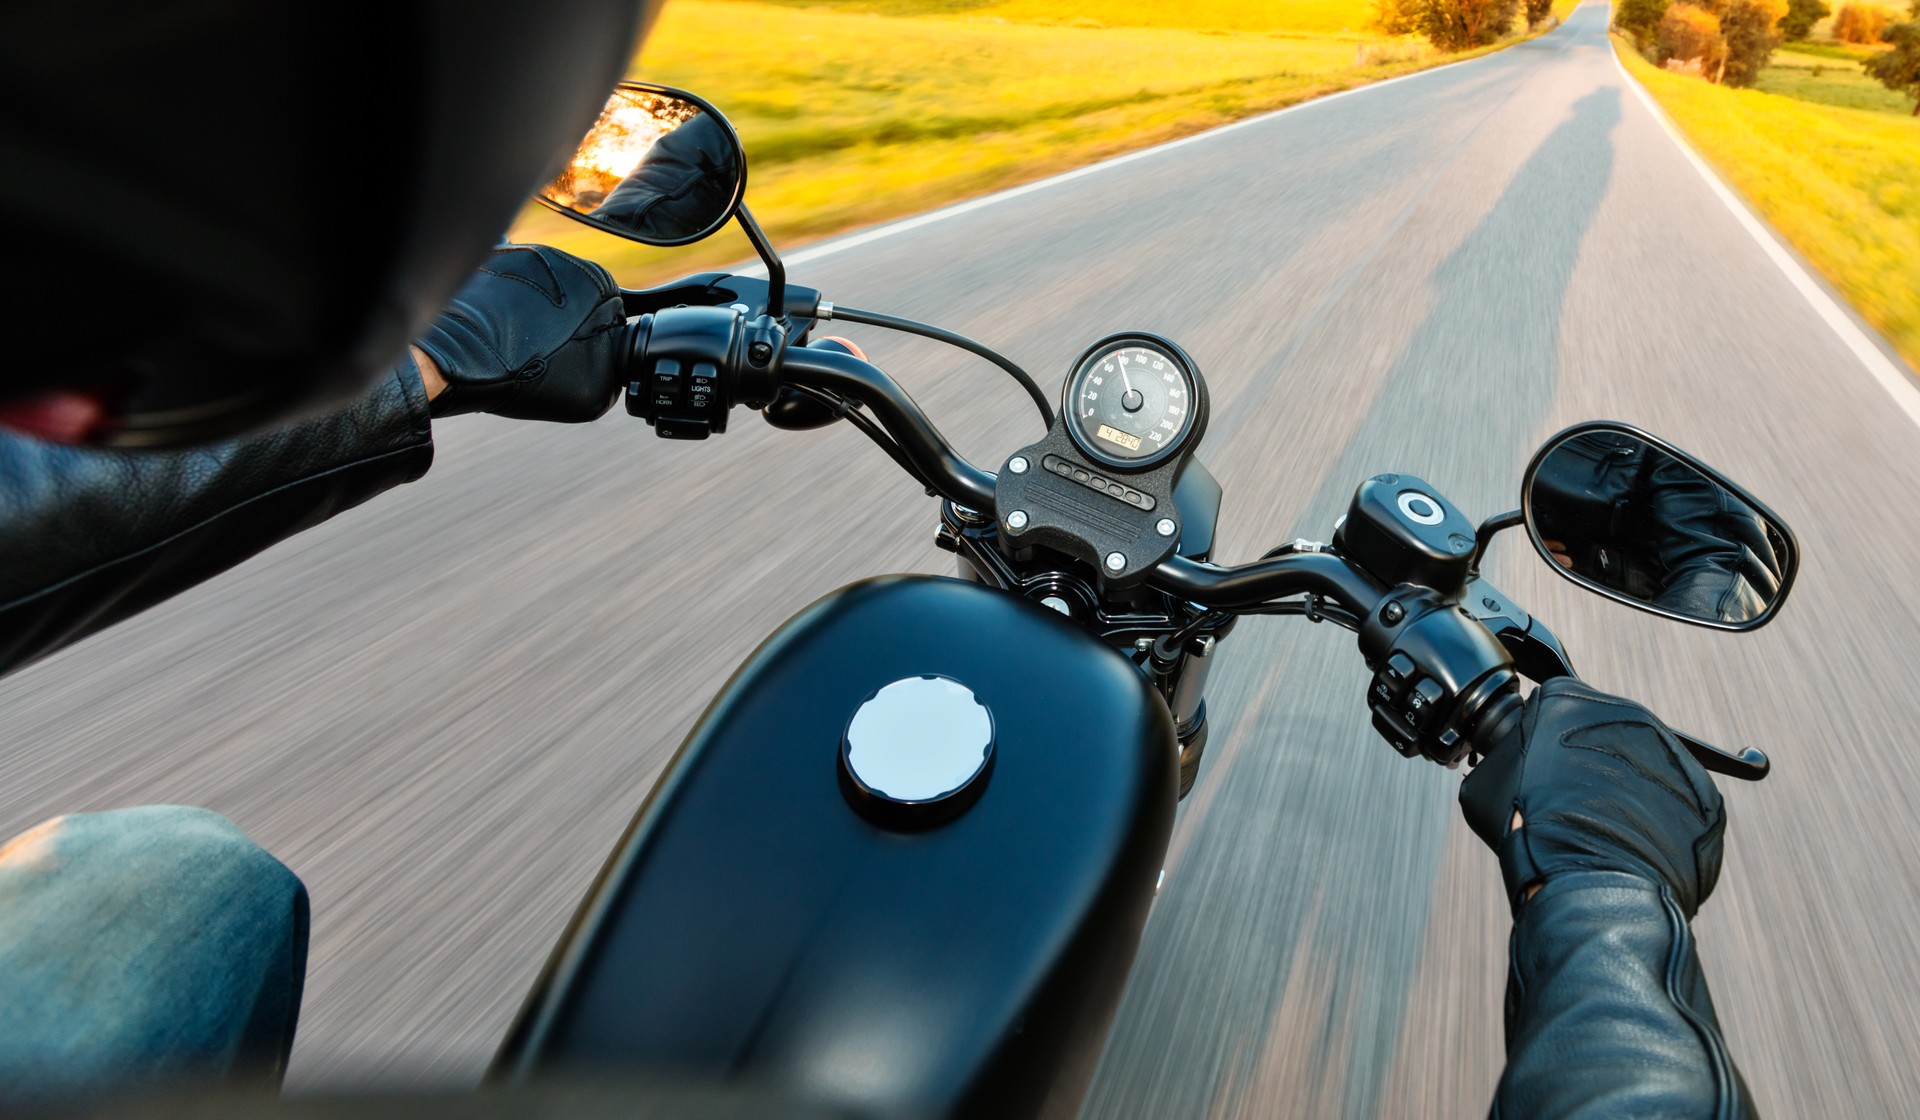 How to choose good motorcycle and scooter insurance

